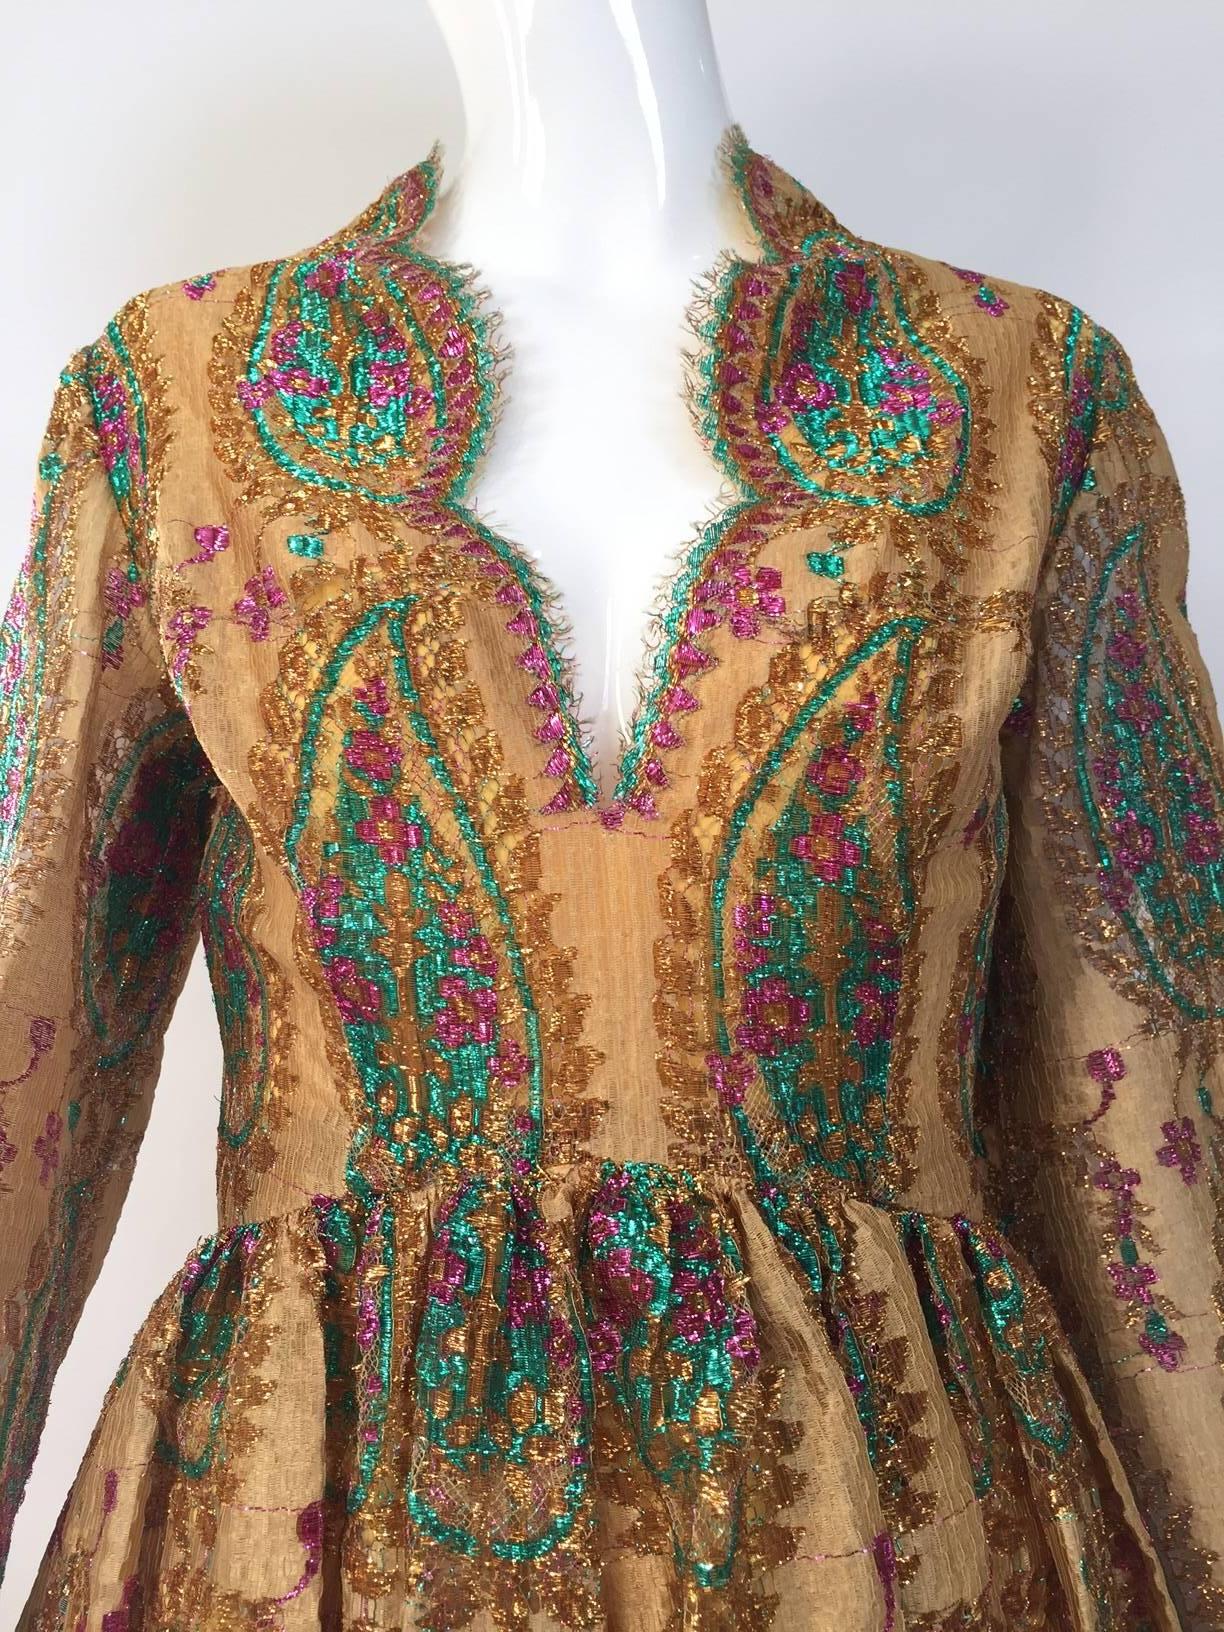 Documented 1968 Bill Blass  gold lace dress. (see editorial images from vogue uk 1968)
 Paisley print green and fuschia metallic thread woven onto the lace.

Bust : 34
Waist : 27